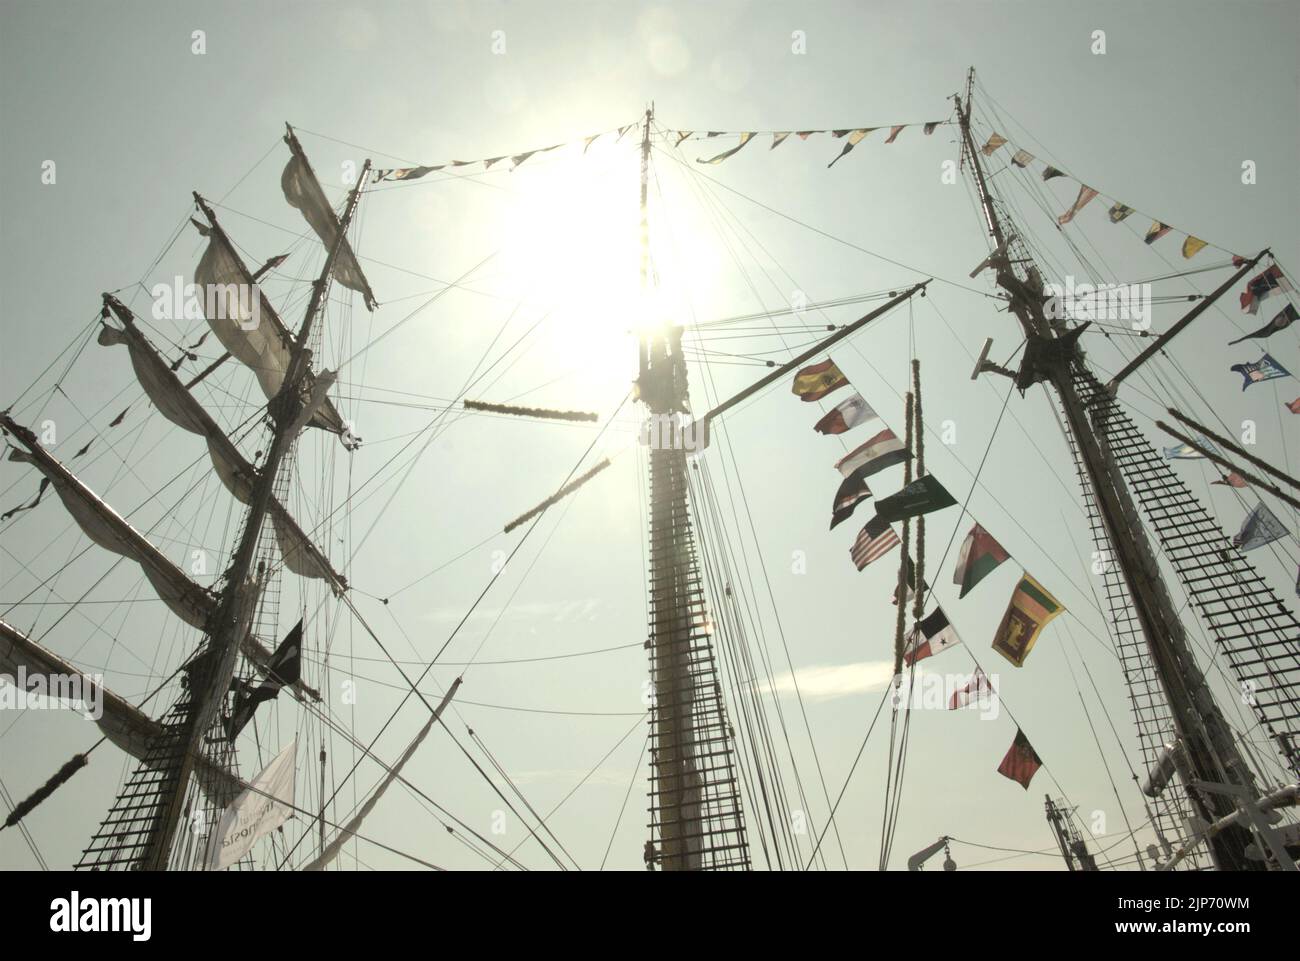 The masts of KRI Dewaruci (Dewa Ruci), an Indonesian tall ship, as the barquentine type schooner is opened for public visitors at Kolinlamil harbour (Navy harbour) in Tanjung Priok, North Jakarta, Jakarta, Indonesia. Stock Photo